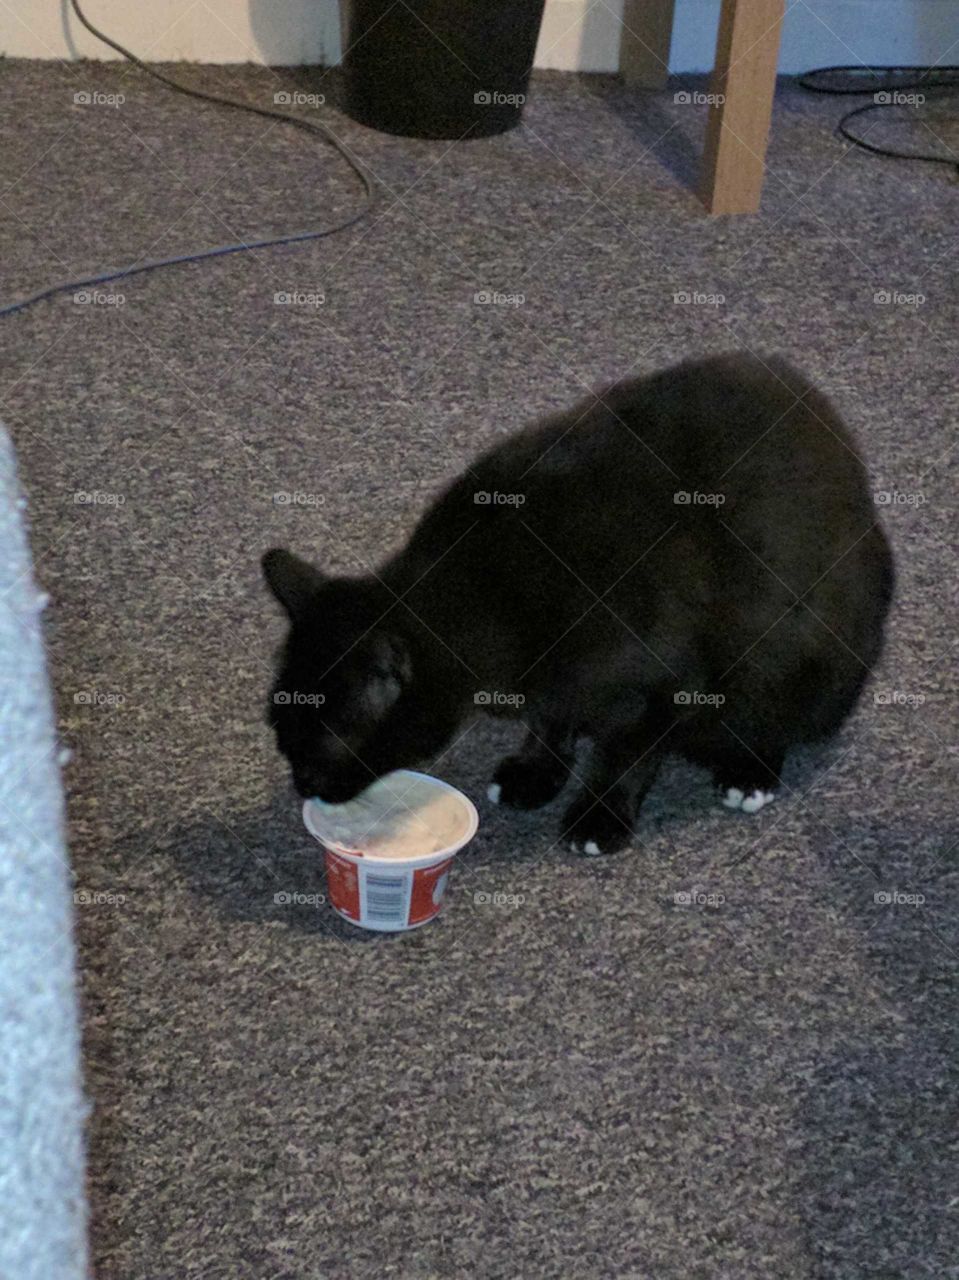 So this is dexter enjoying his favourite yogurt well its rice pudding my mate loves anything like this thank the lord he isn't lactose intolerant, because cats can suffer from lactose intolerance apparently who knew